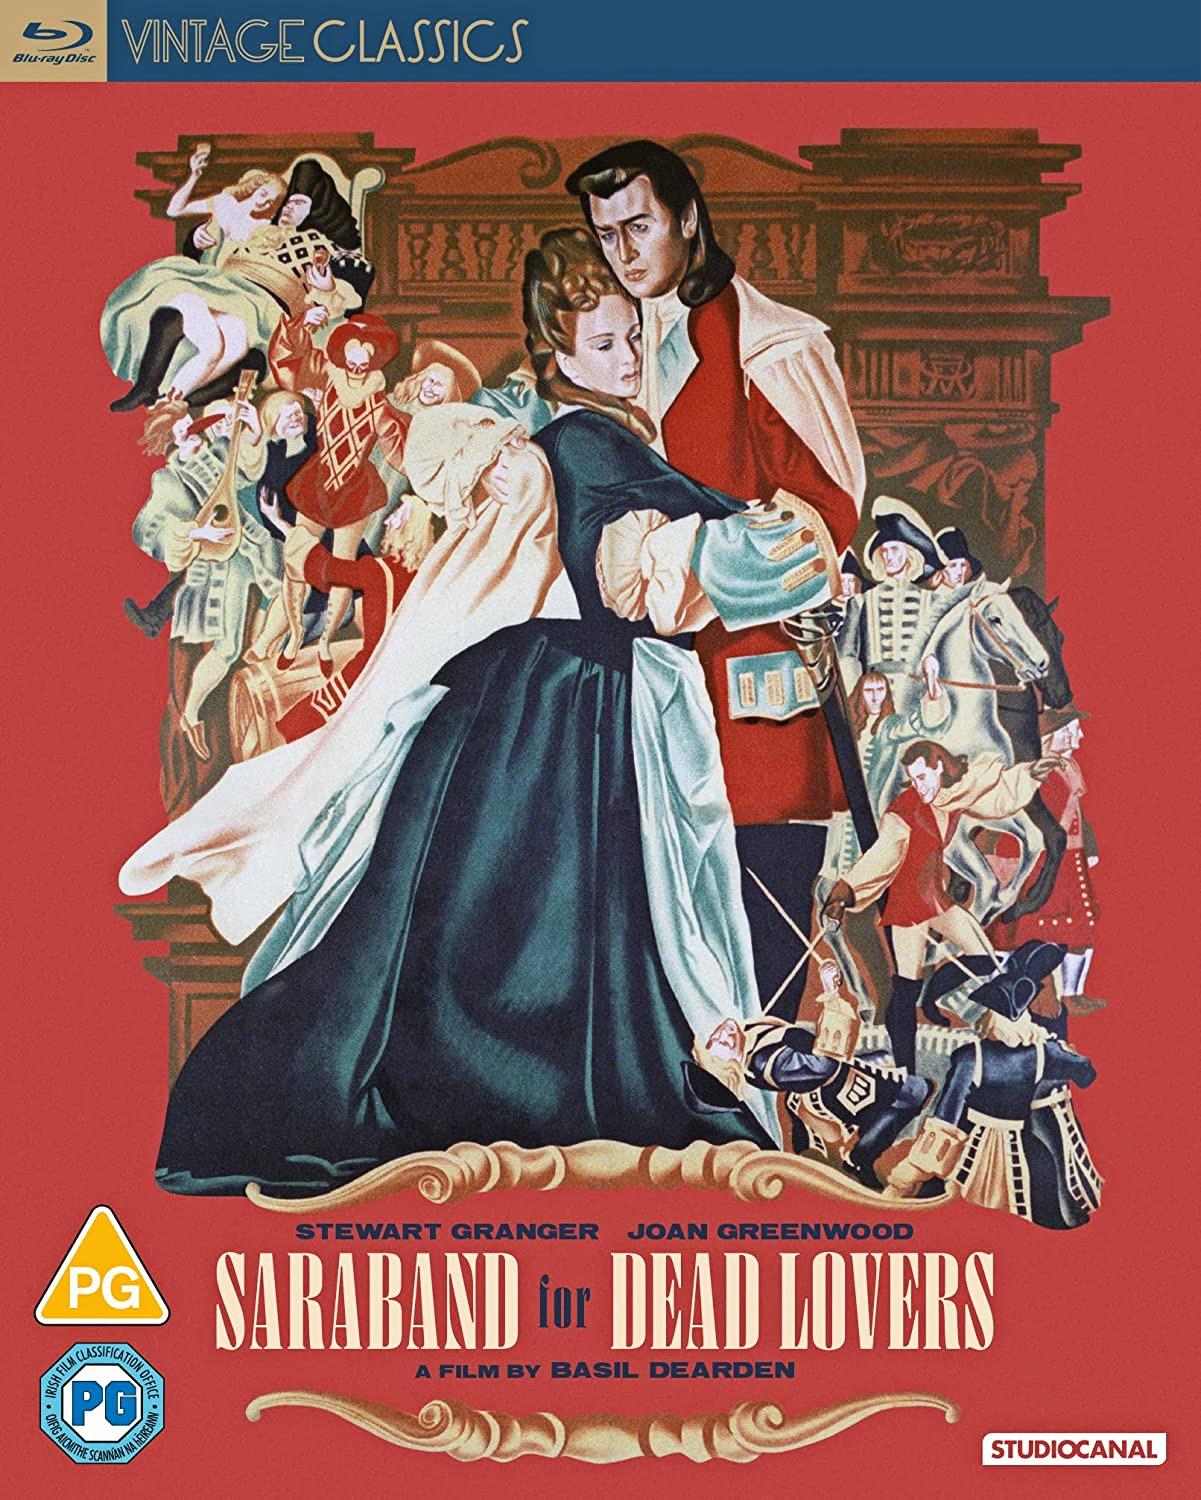 Saraband for Dead Lovers (1948) Blu-ray cover from Studiocanal [2023] (1) featuring Joan Greenwood and Stewart Granger